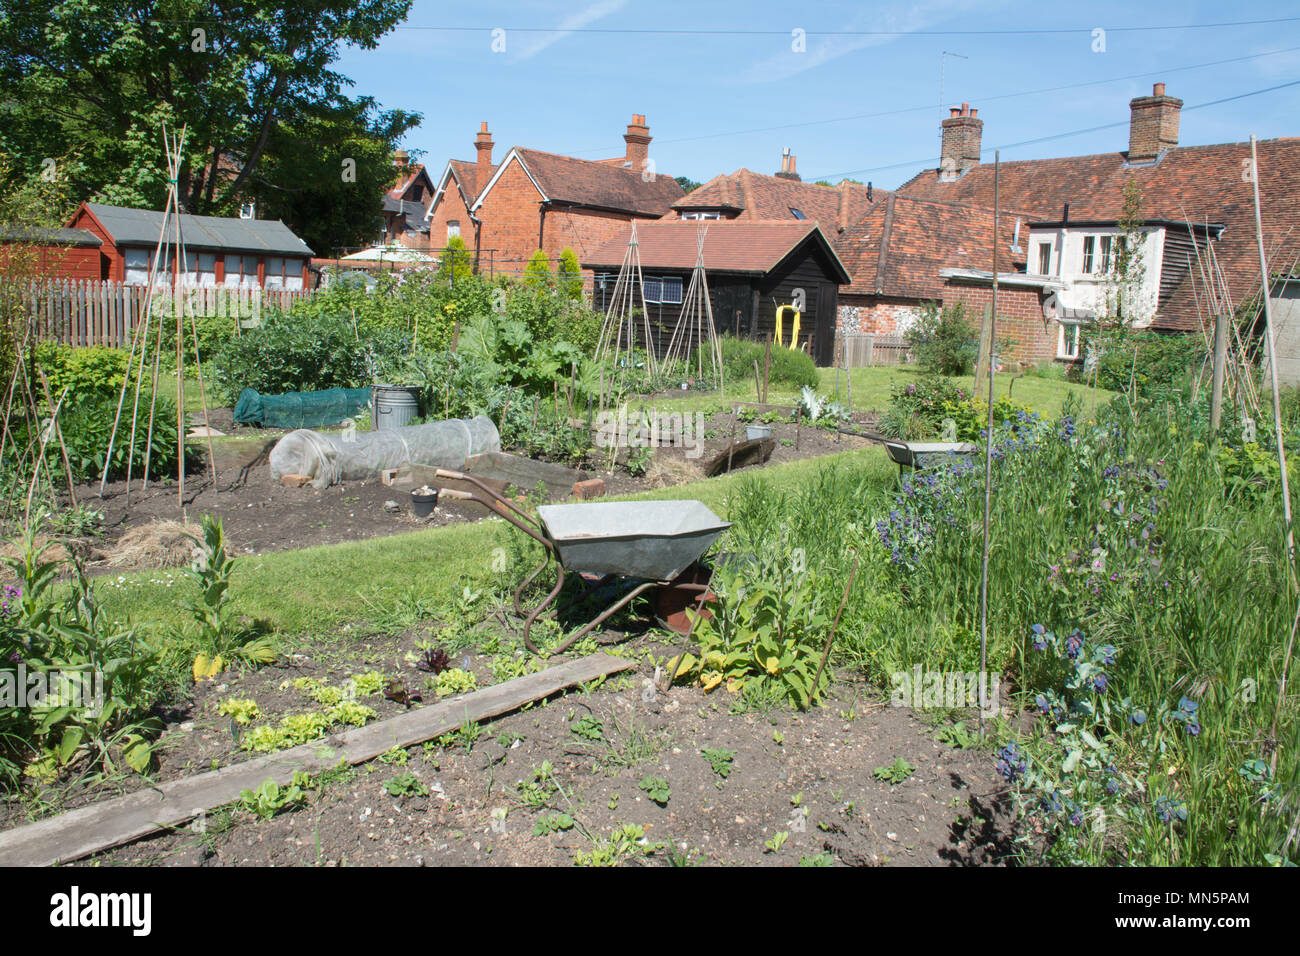 Village allotments at Goring-on-Thames in Oxfordshire, UK Stock Photo